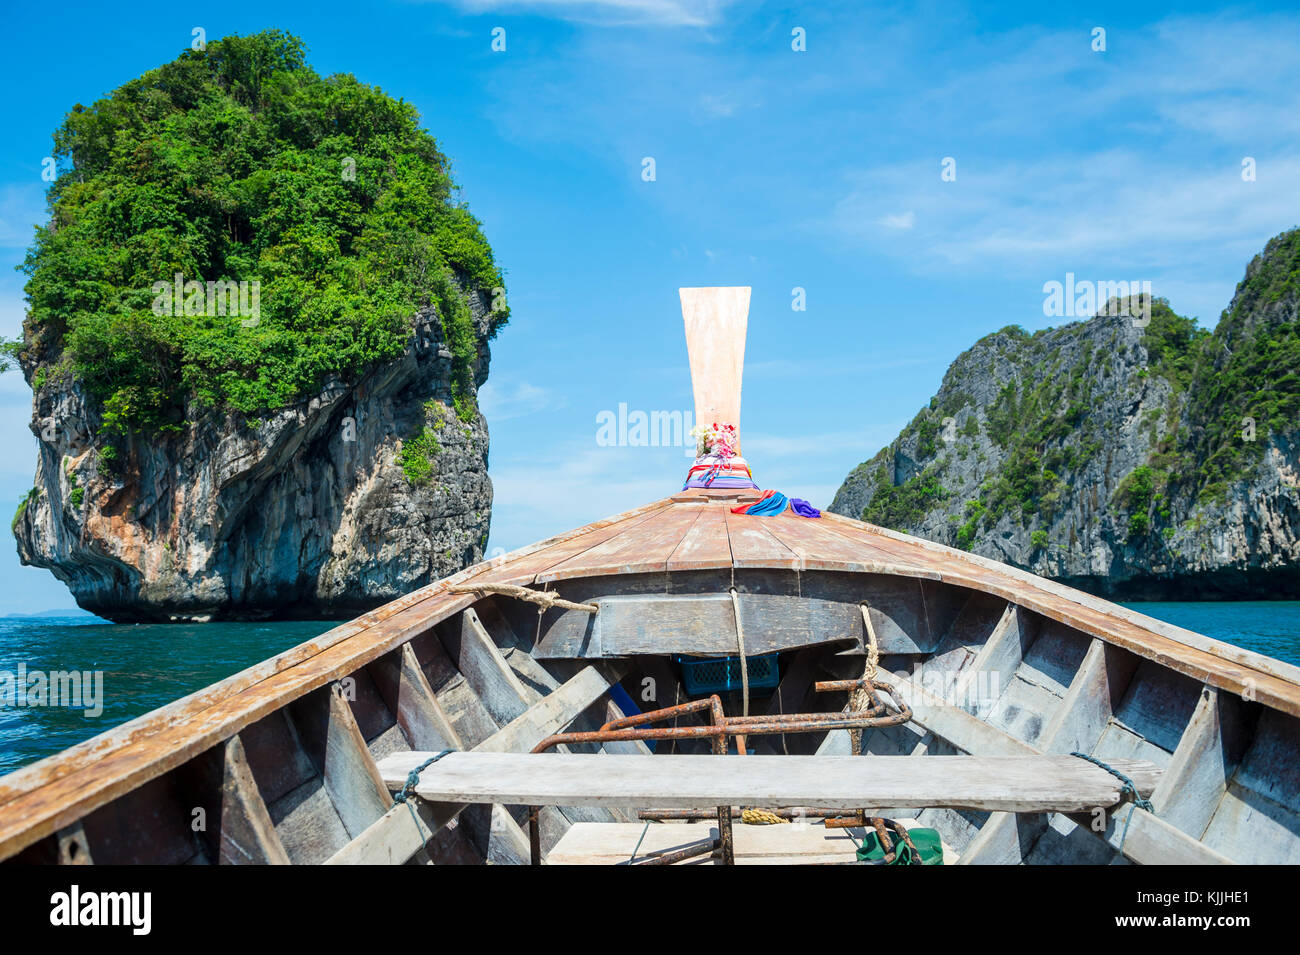 Traditional Thai wooden longtail boat with dramatic karst geography on the way to Maya Bay from Phi Phi Island Stock Photo